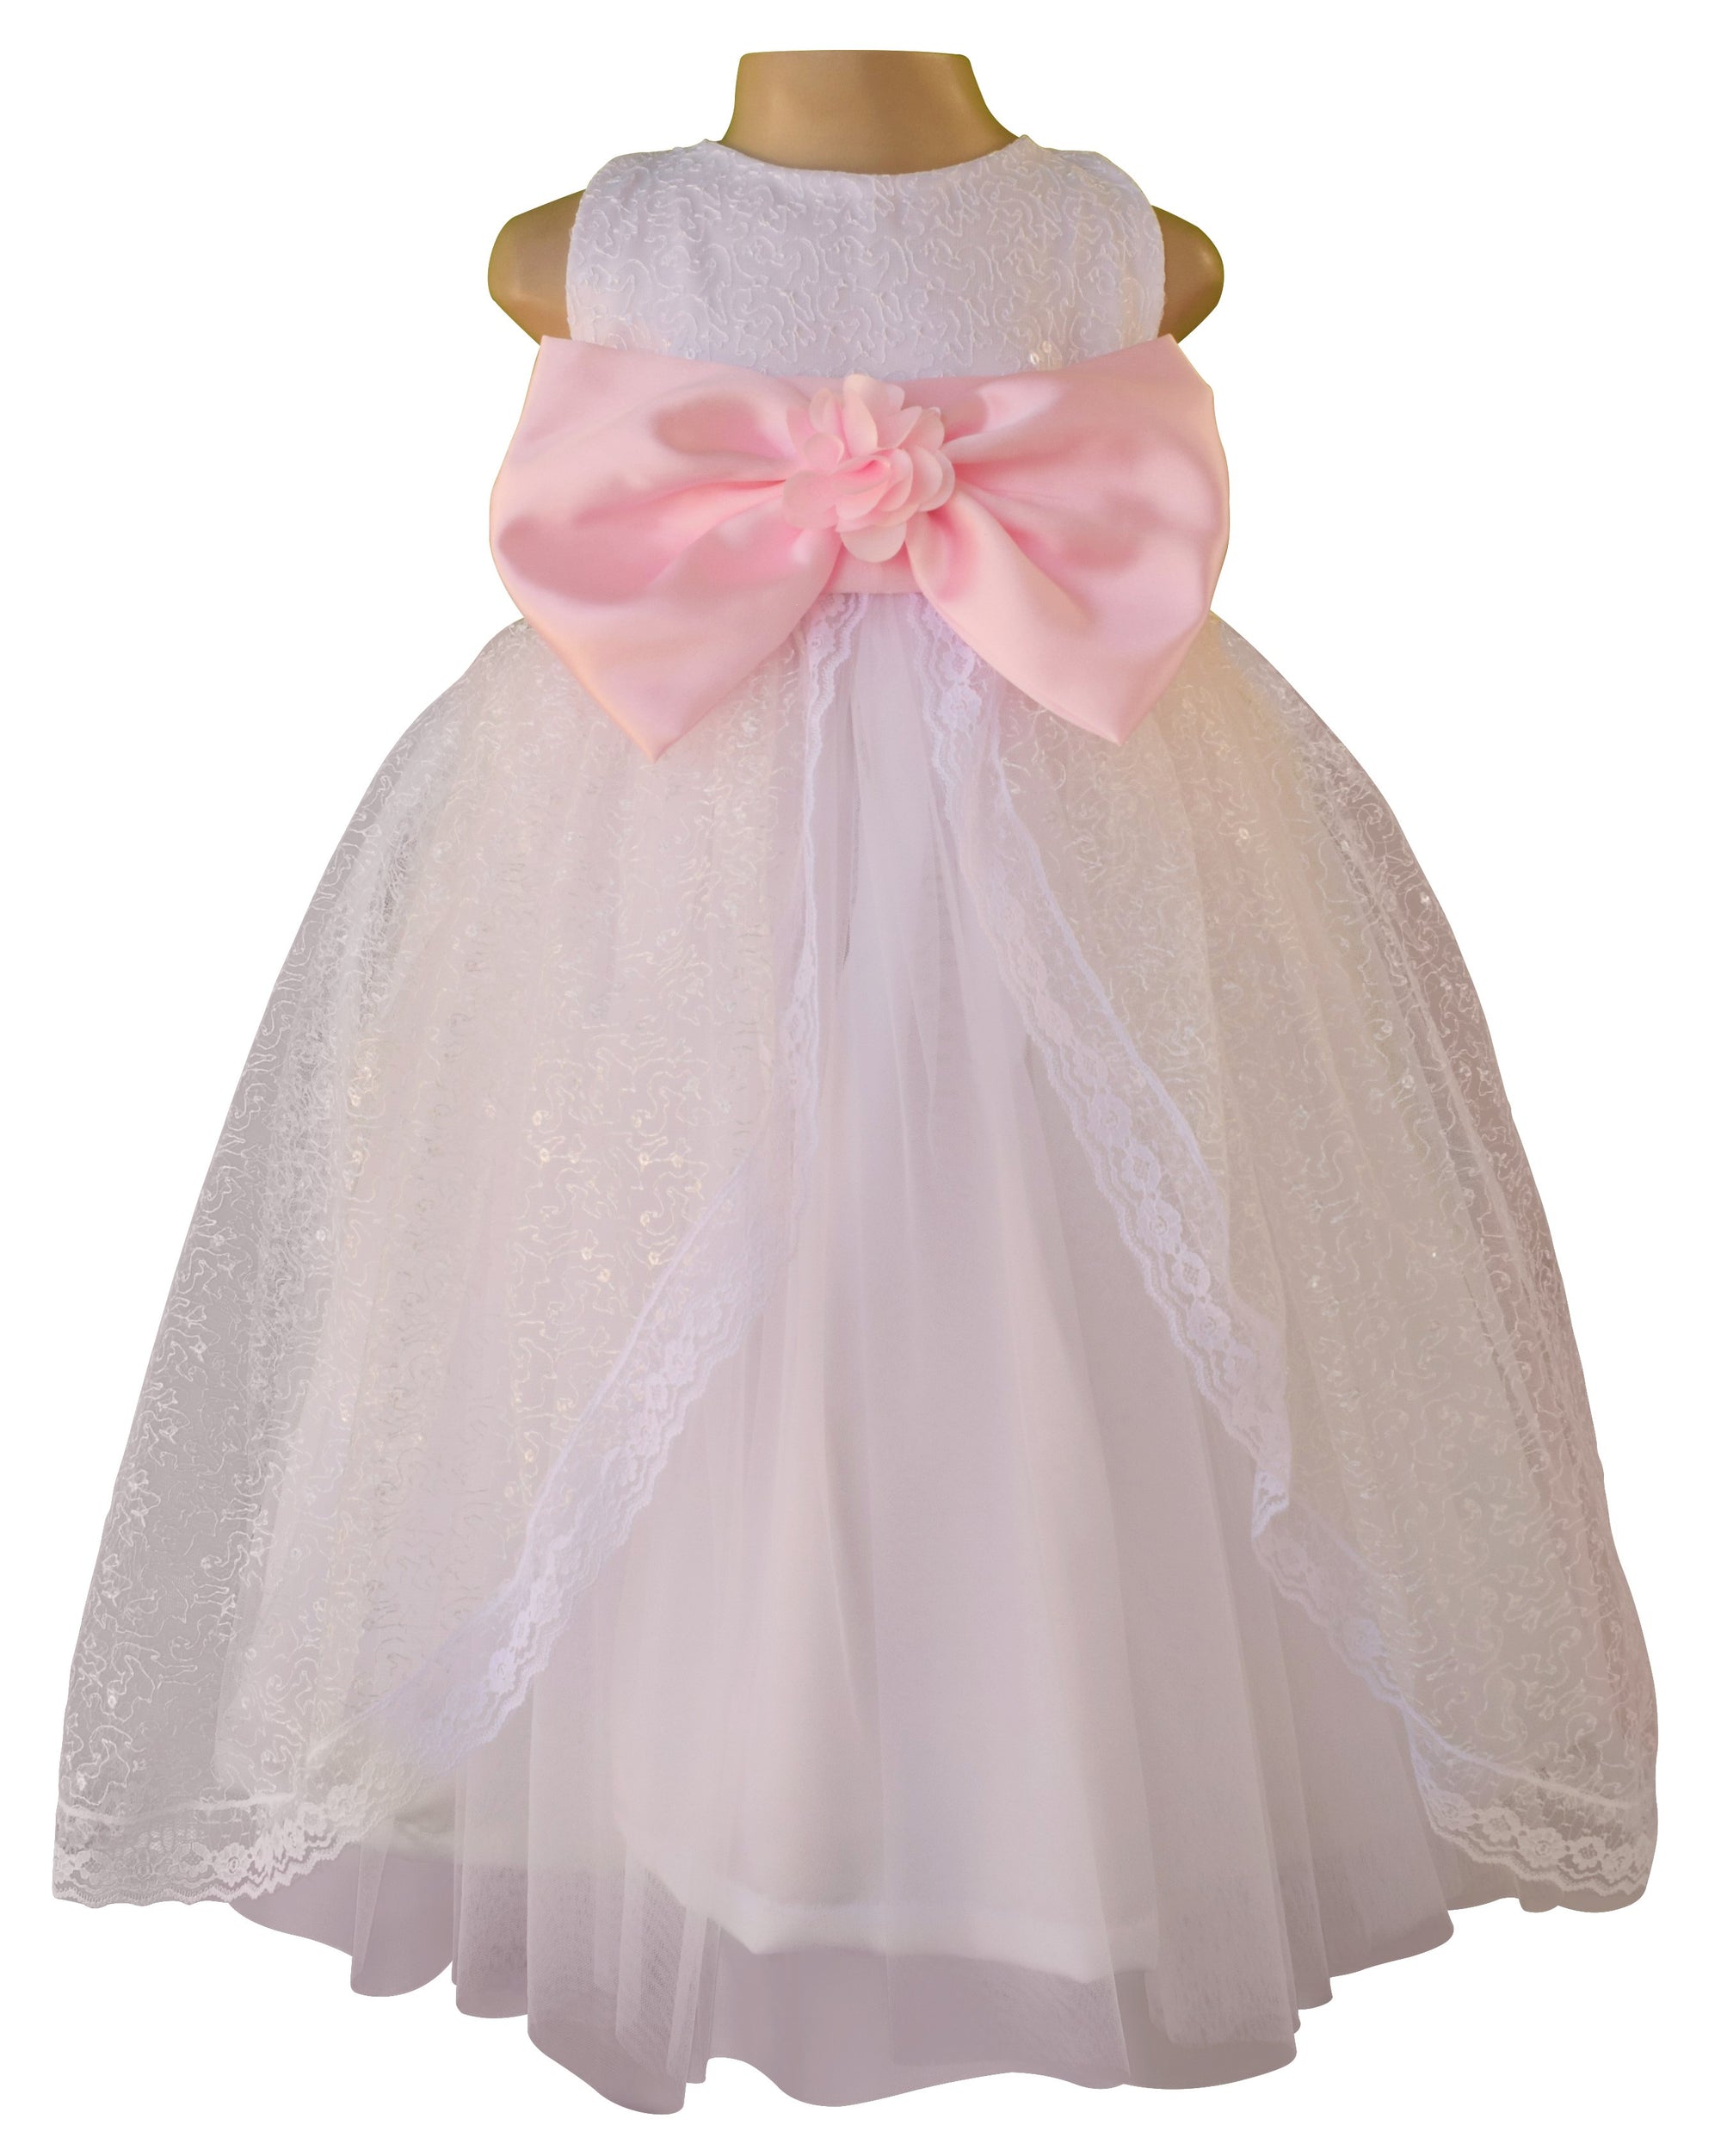 Faye White Embroidered Gown with Pink Bow & Sash